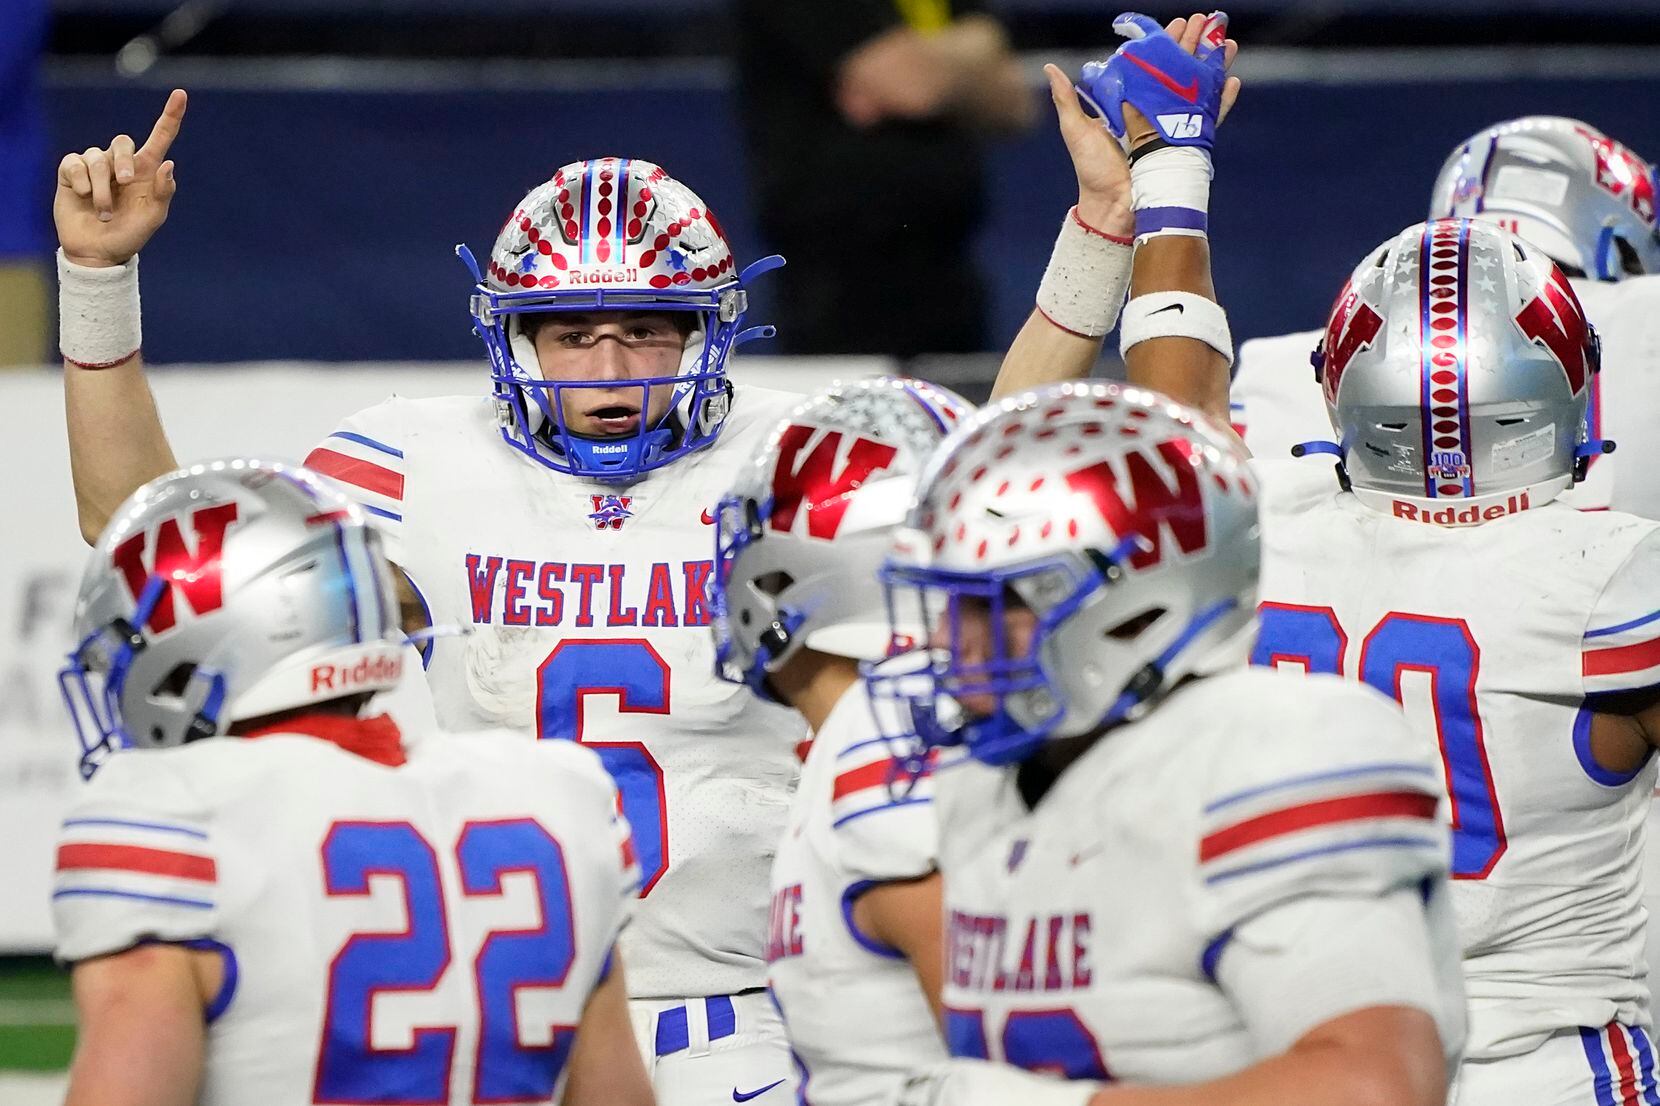 Austin Westlake quarterback Cade Klubnik (6) celebrates a touchdown run by running back Grey Nakfoor (22) during the fourth quarter of the Class 6A Division I state football championship game against Southlake Carroll at AT&T Stadium on Saturday, Jan. 16, 2021, in Arlington, Texas. Westlake won the game 52-34.